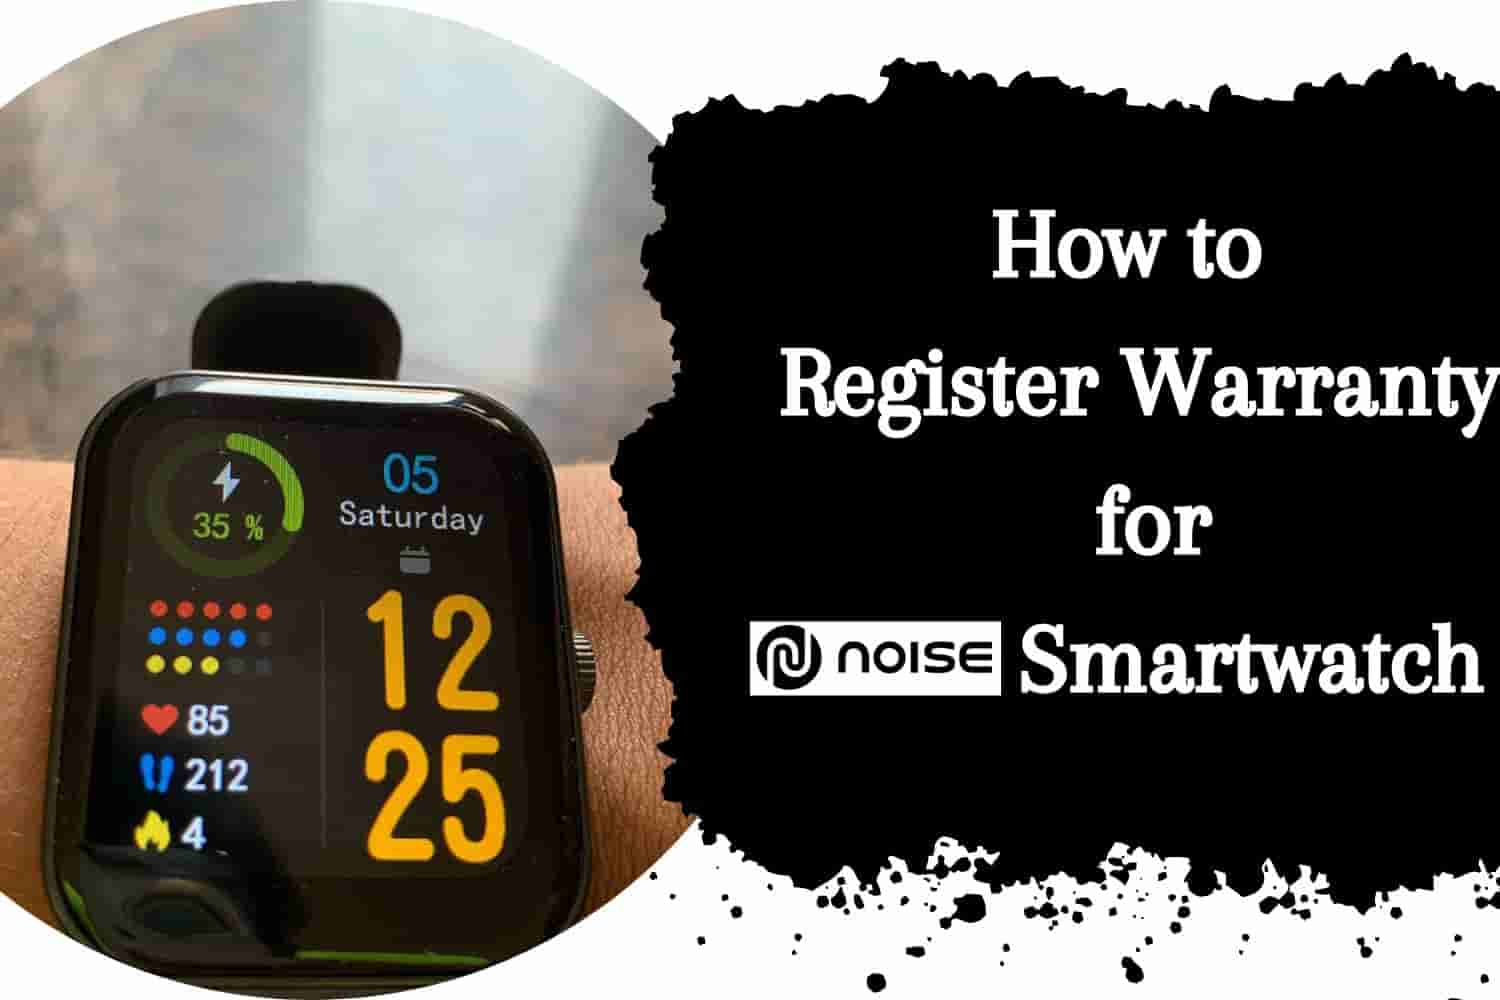 How to Register Warranty for noise Smart Watch